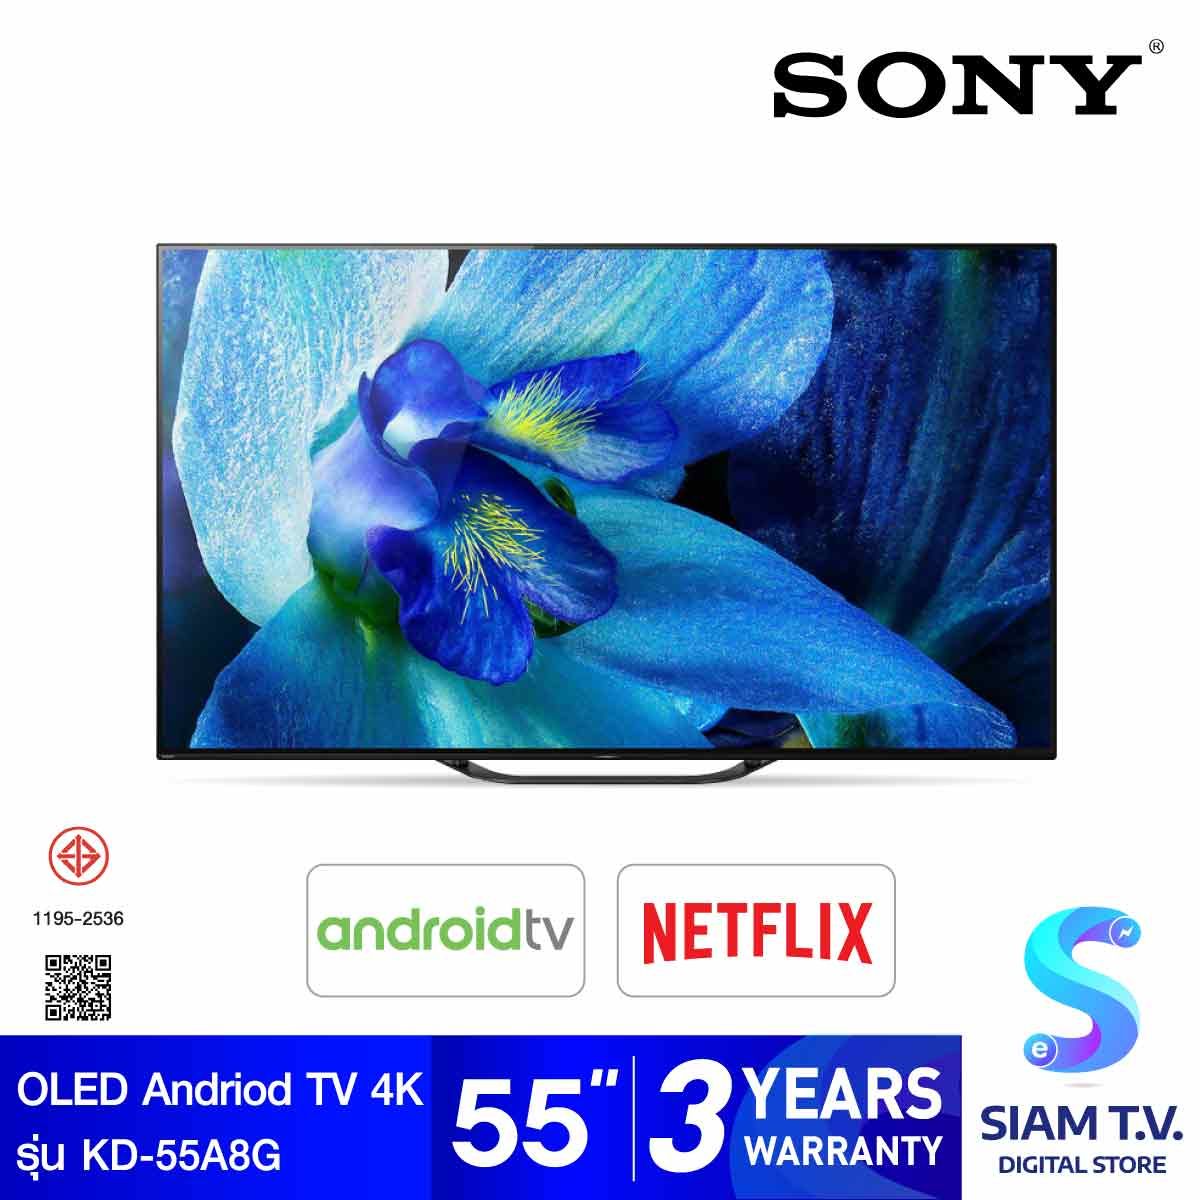 SONY OLED Android TV รุ่น KD-55A8G   High Dynamic Range  HDR  Android TV